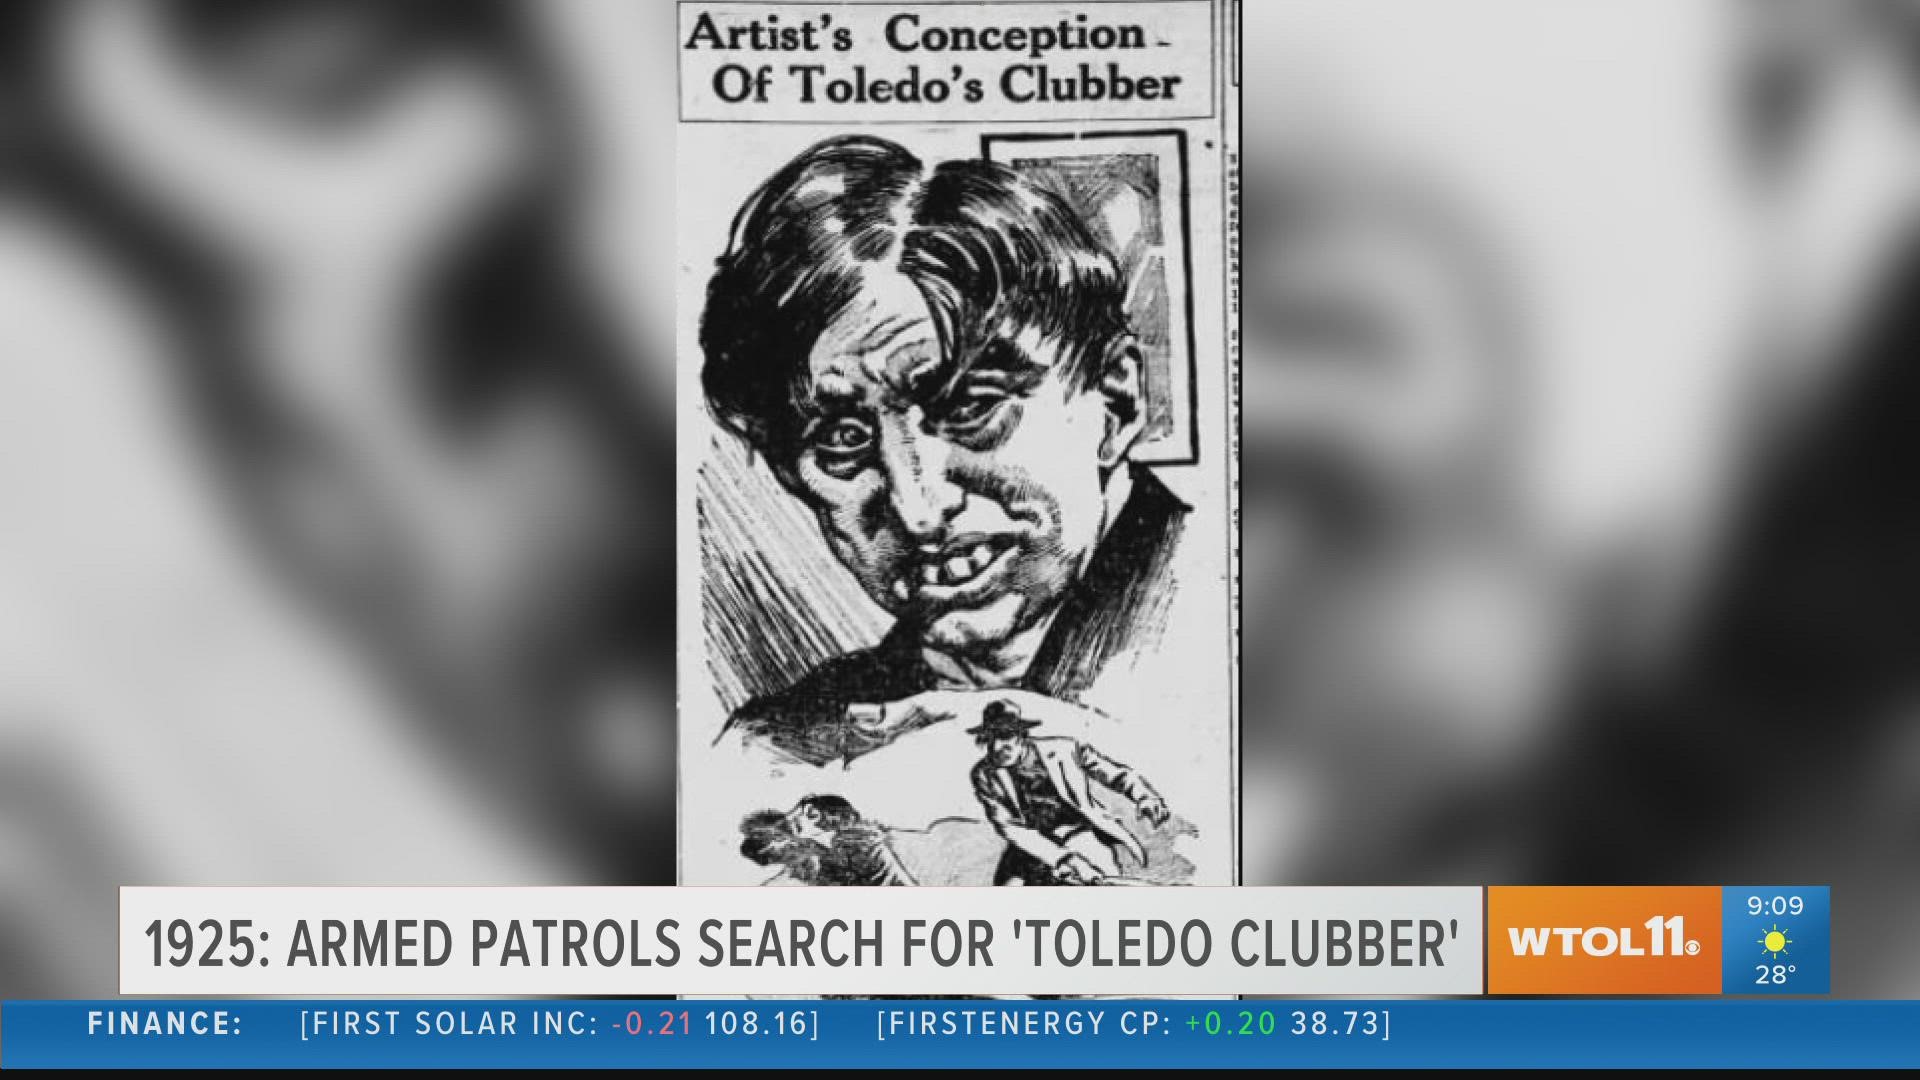 From the 'Toledo Clubber' to a deadly hunting season, here's a look at what happened on Nov. 23 throughout Toledo history.